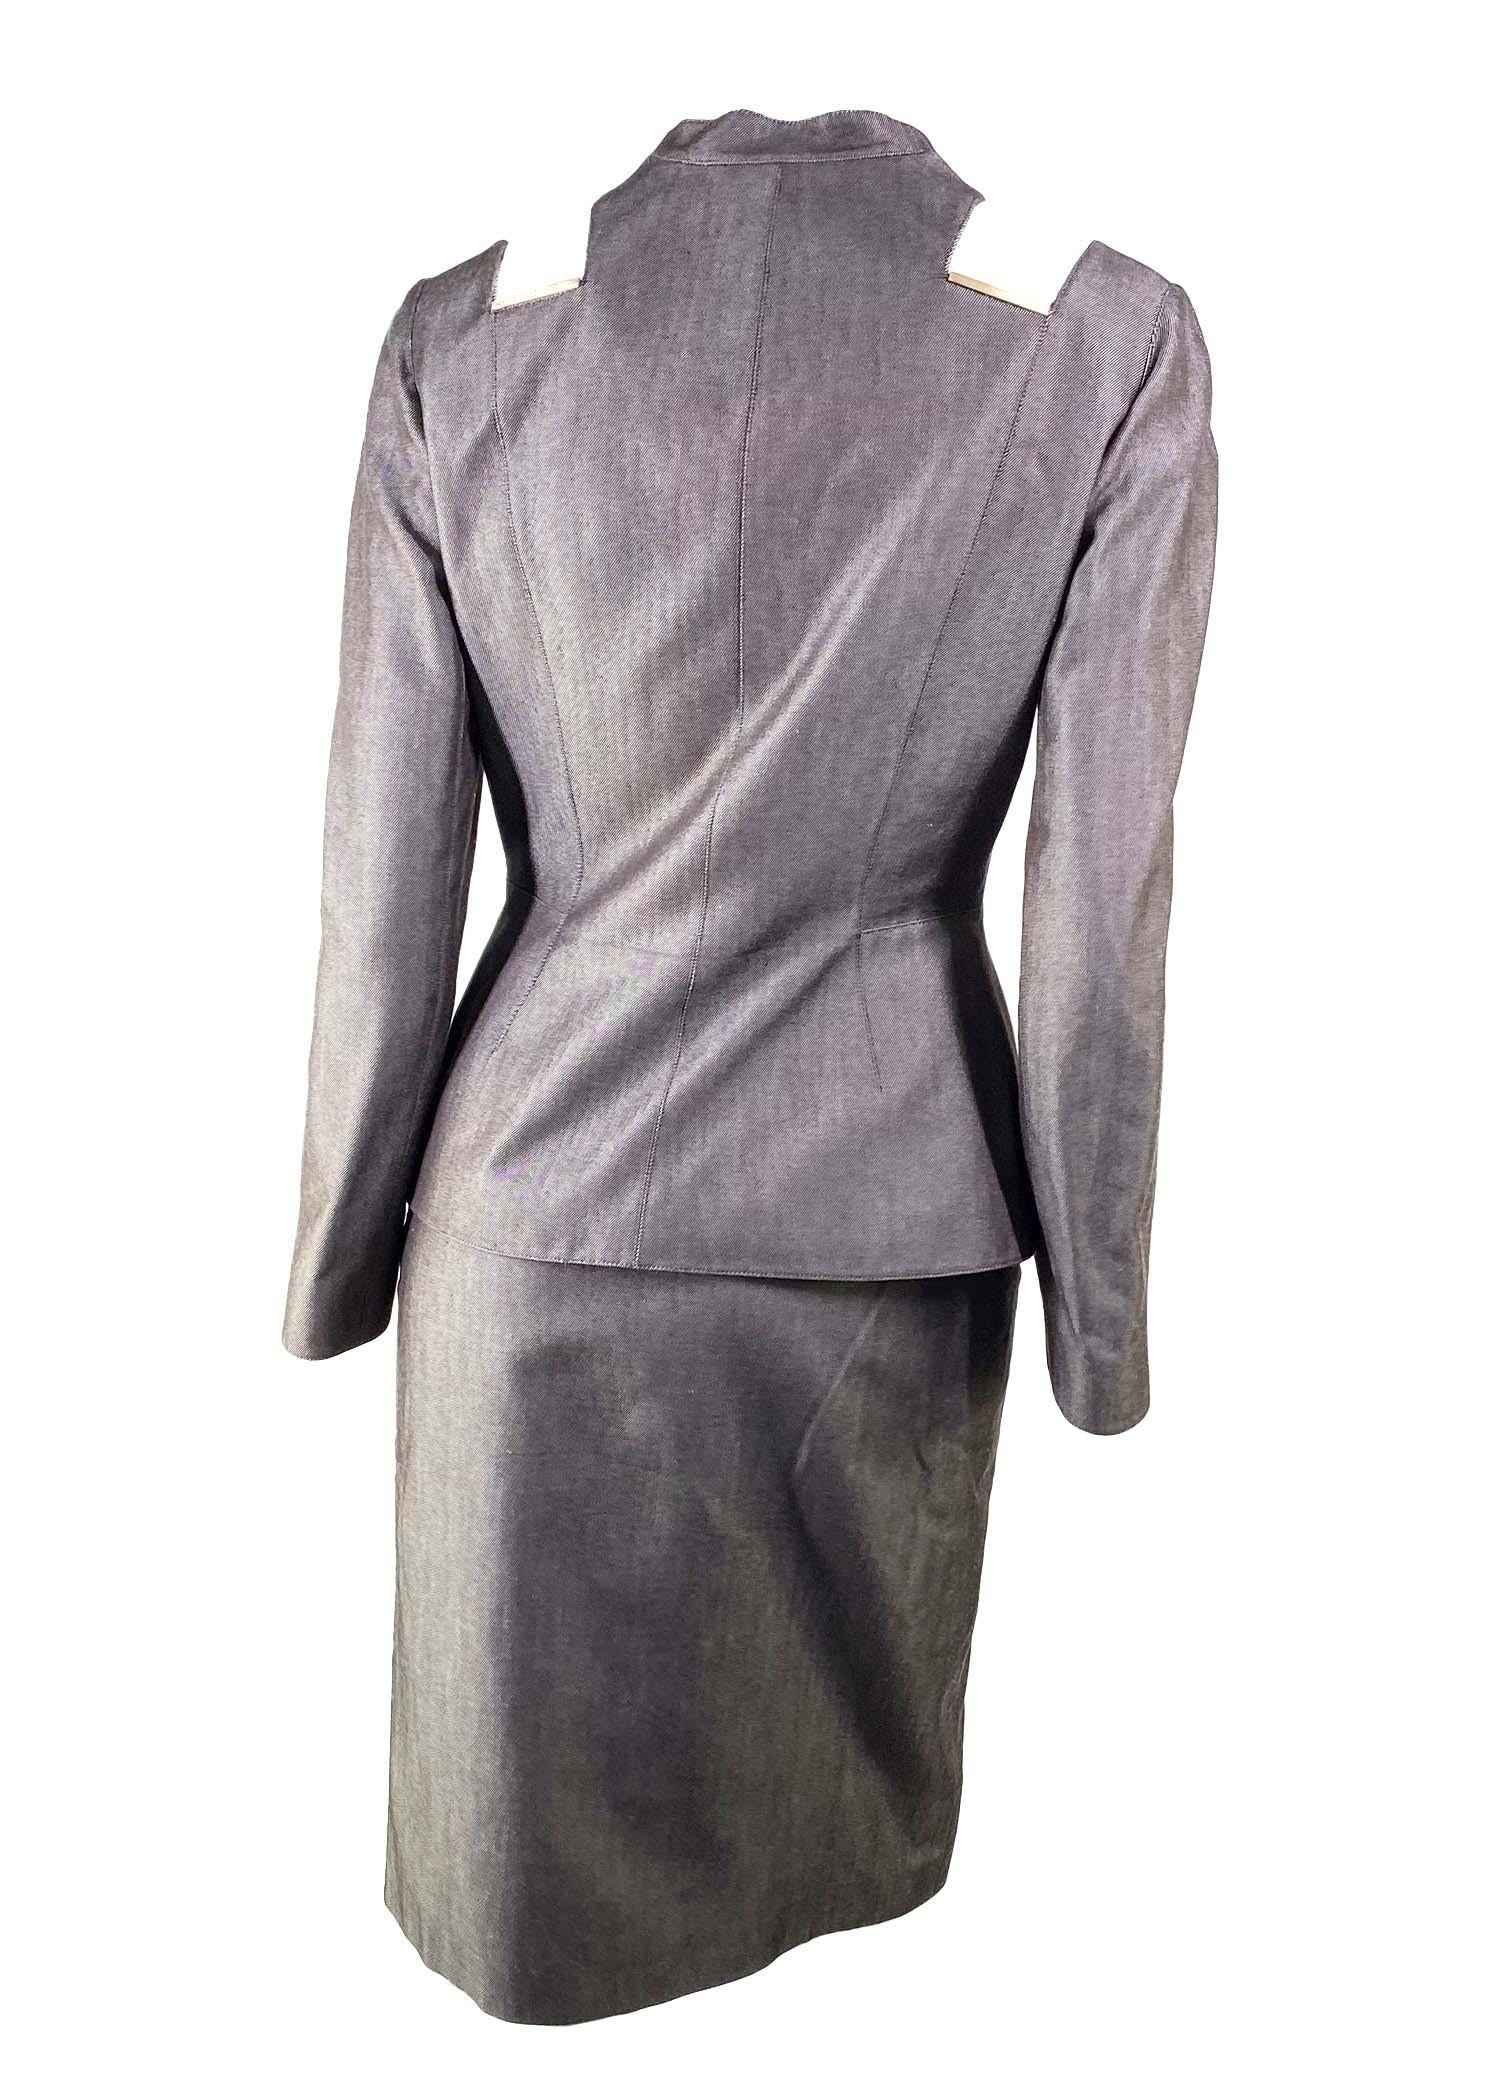 Gray 1990s Thierry Mugler Couture Cutout Skirt Suit with Metal Accents